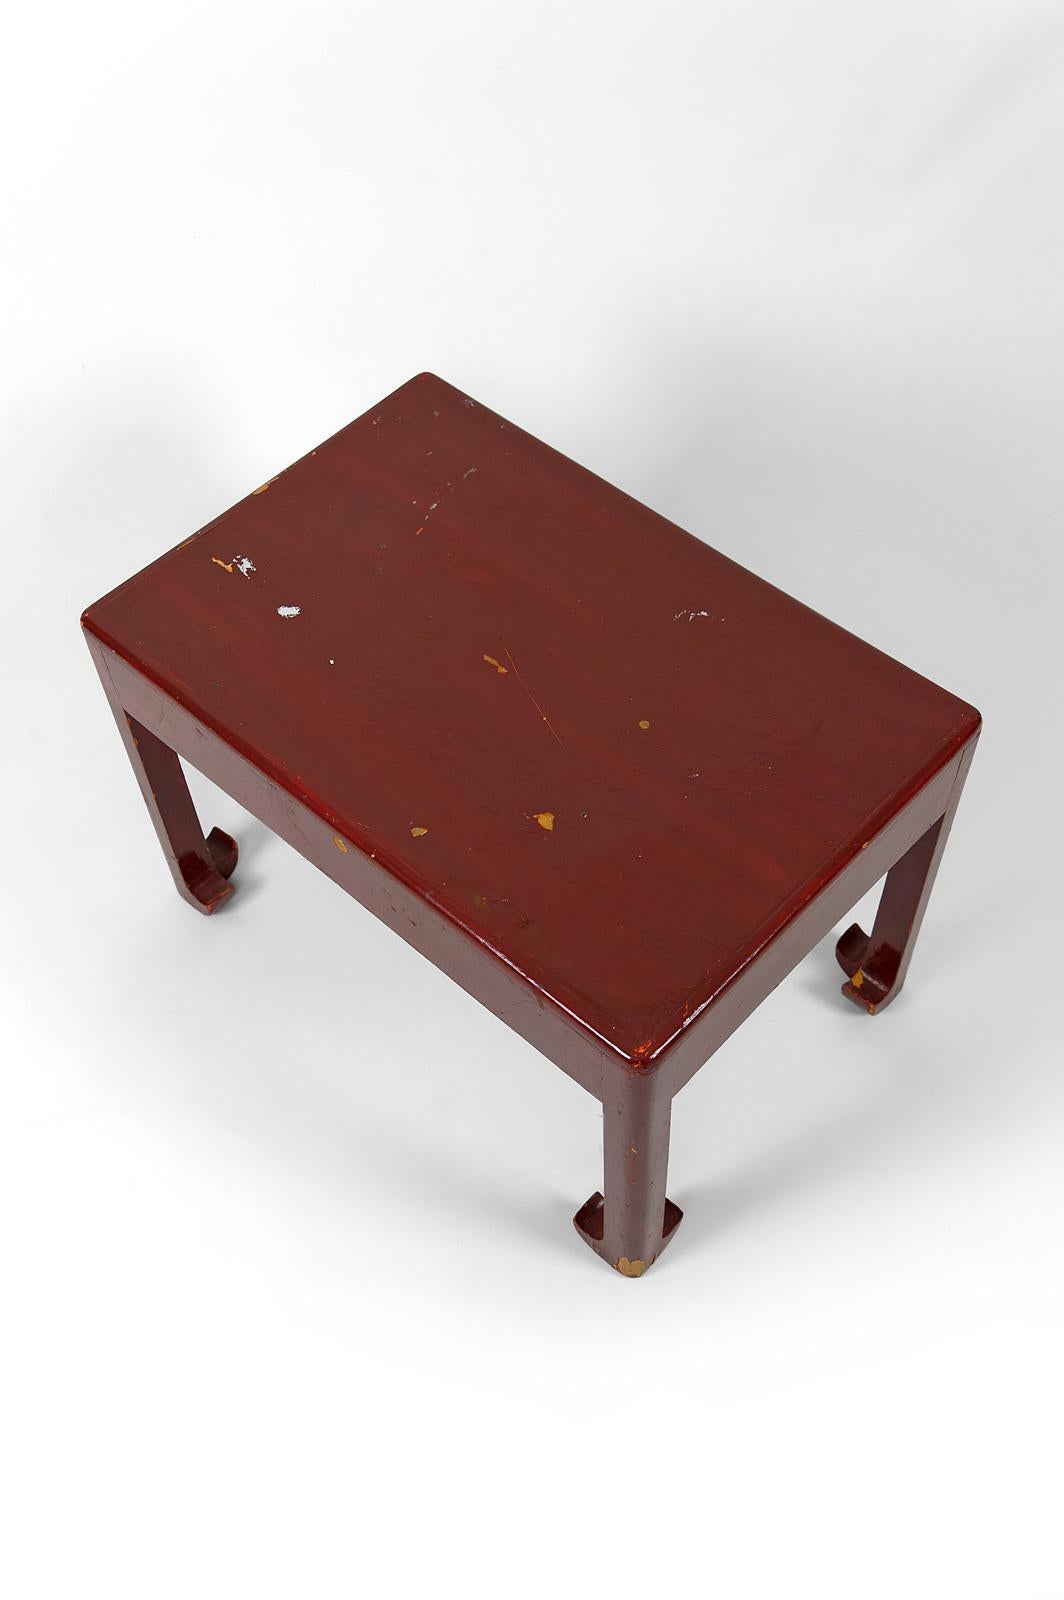 Lacquered coffee table / end table by Paul Poiret for Atelier Martine, France 1